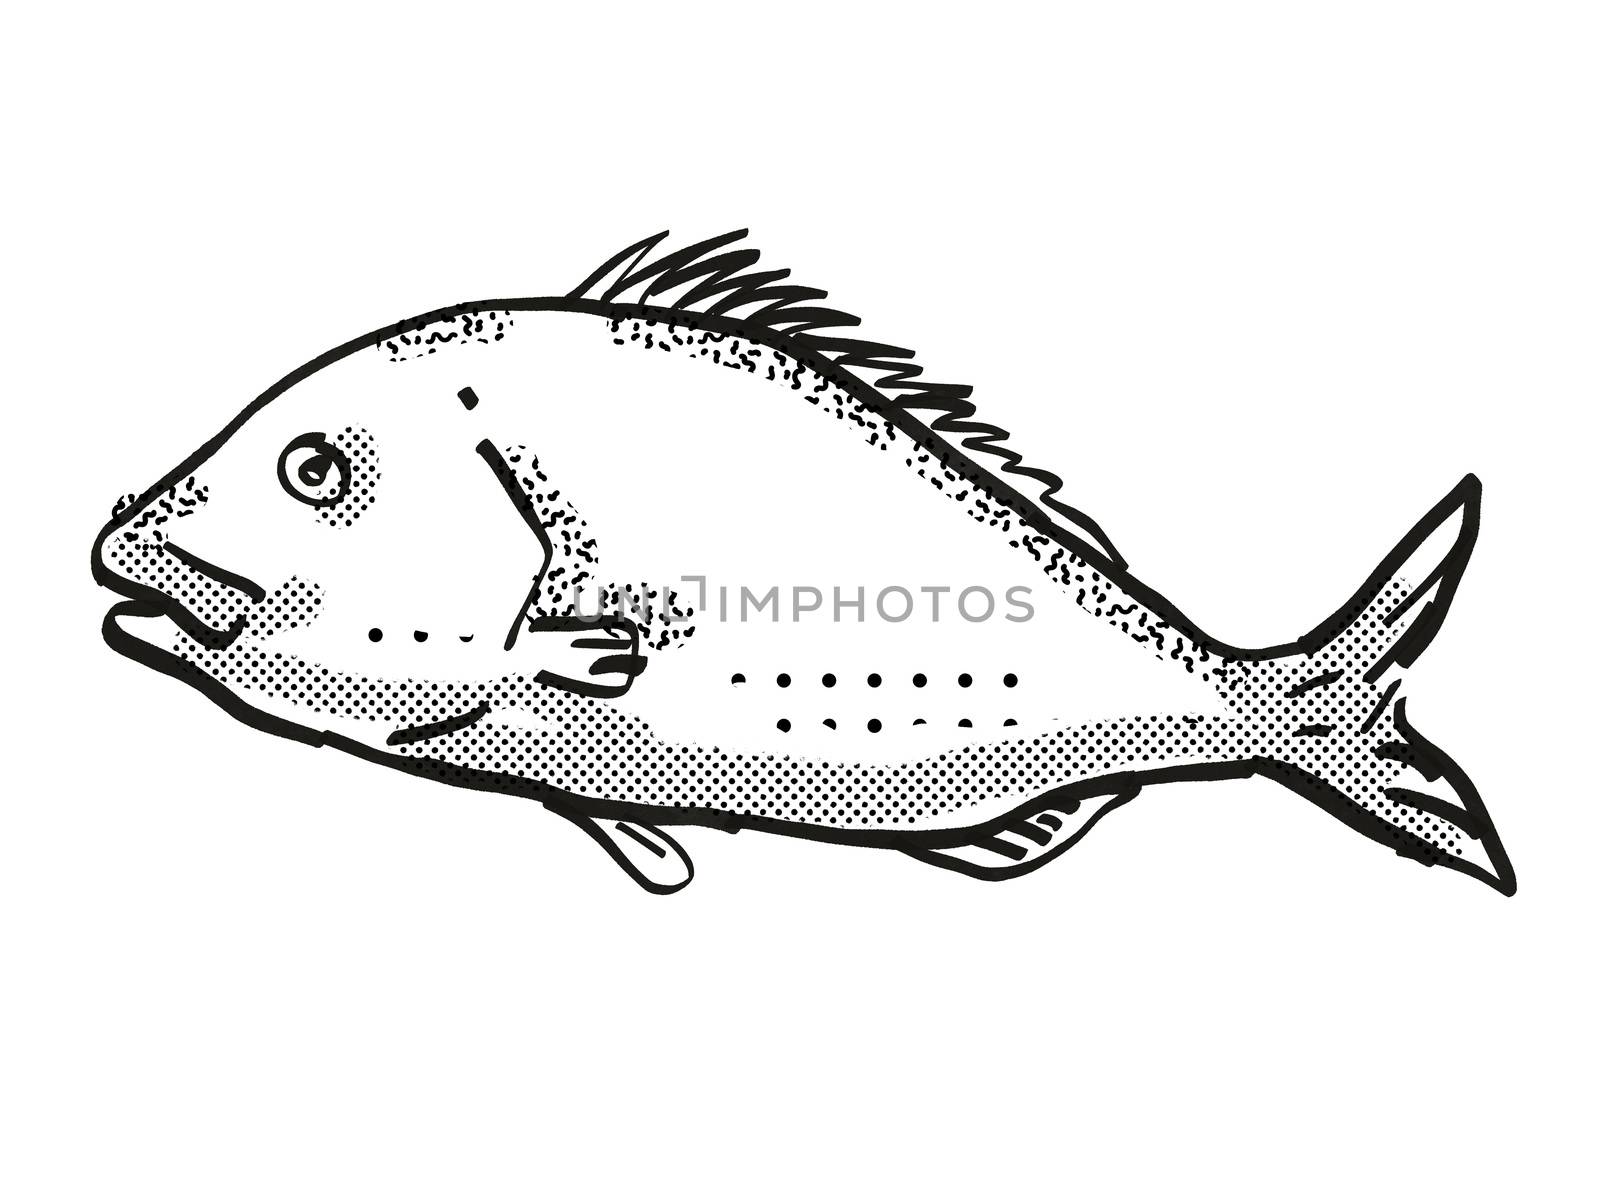 Retro cartoon style drawing of a snapper fish, a native New Zealand marine life species viewed from side on isolated white background done in black and white